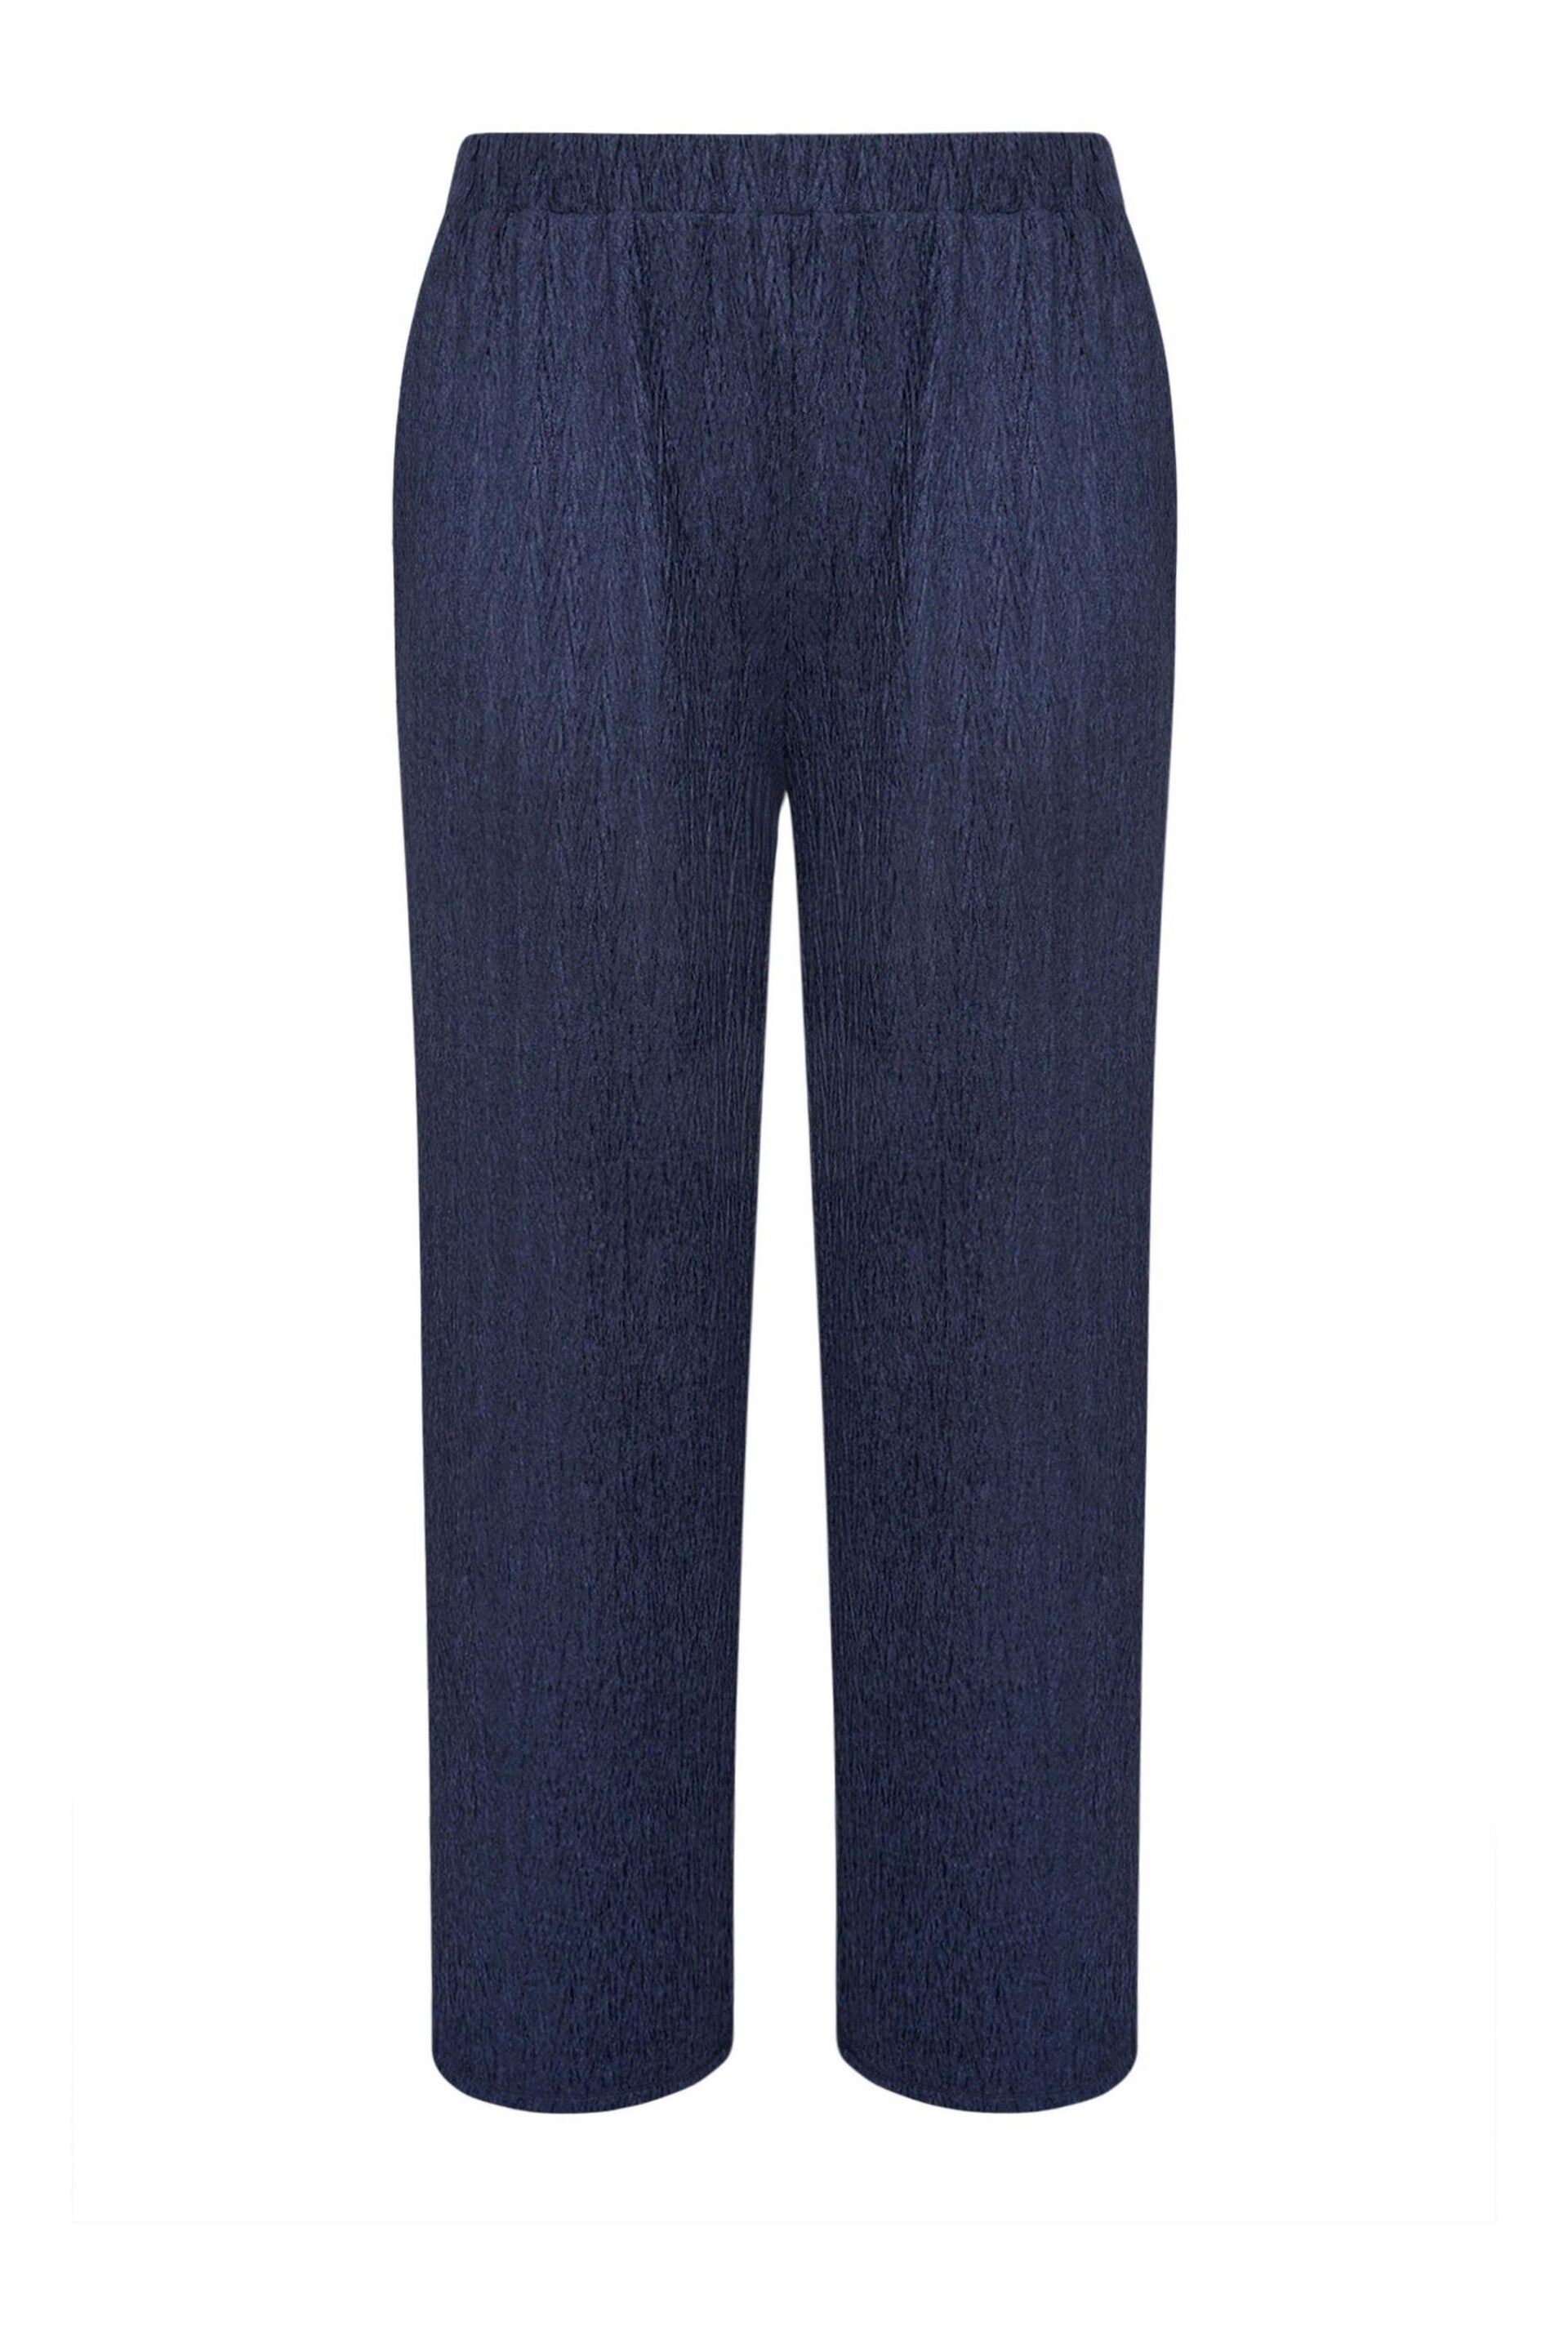 Yours Curve Blue Crinkle Plisse Trousers - Image 5 of 5